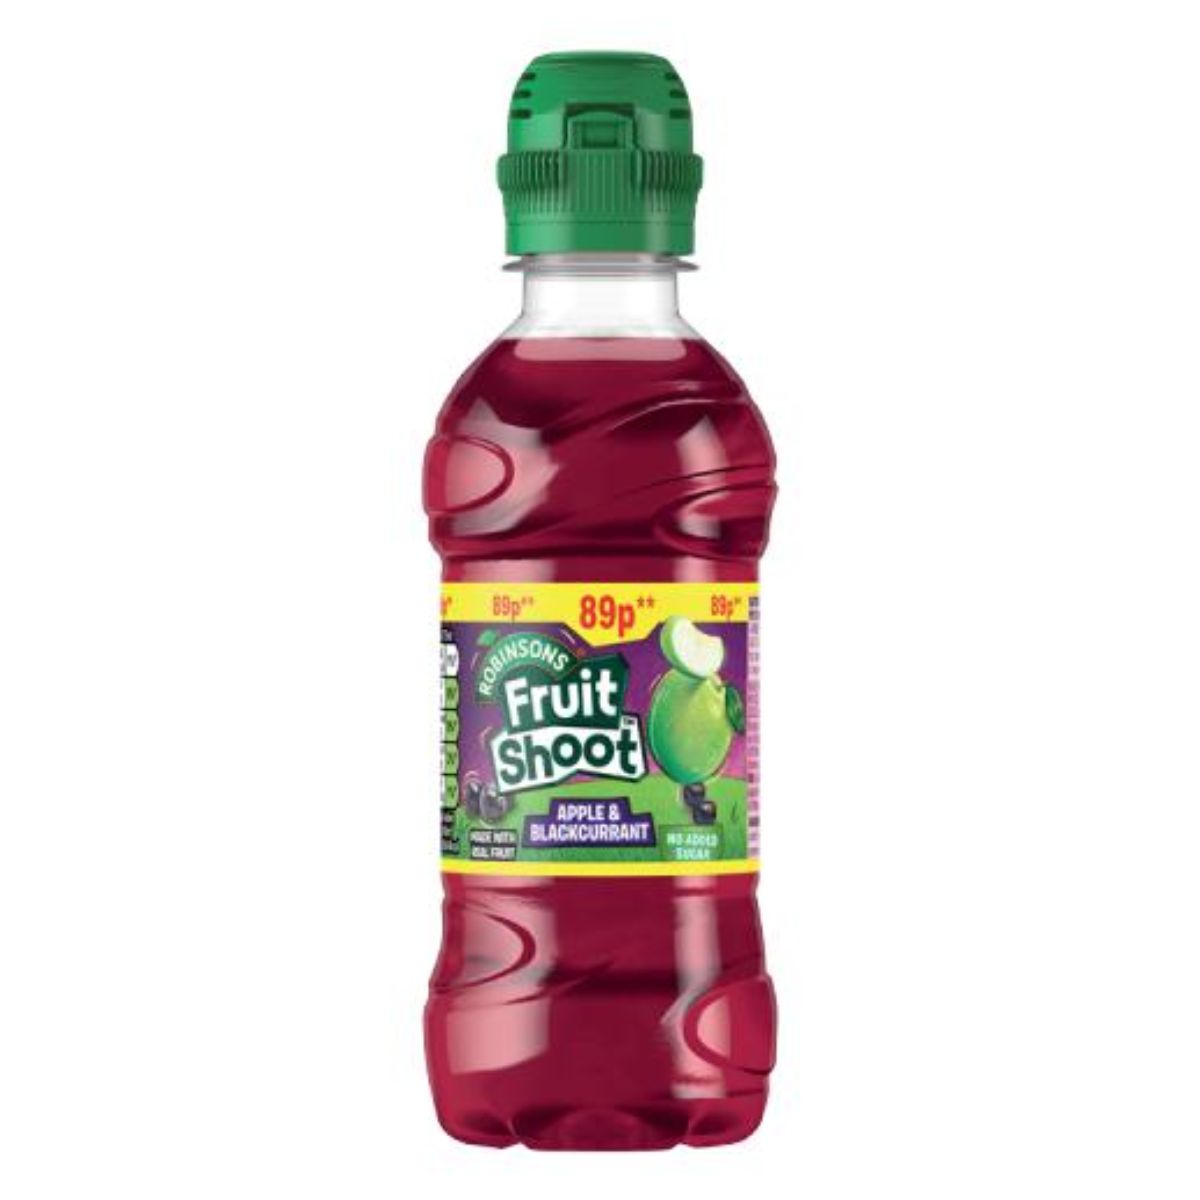 A bottle of Robinsons - Fruit Shoot Apple & Blackcurrant Juice Drink - 275ml on a white background.